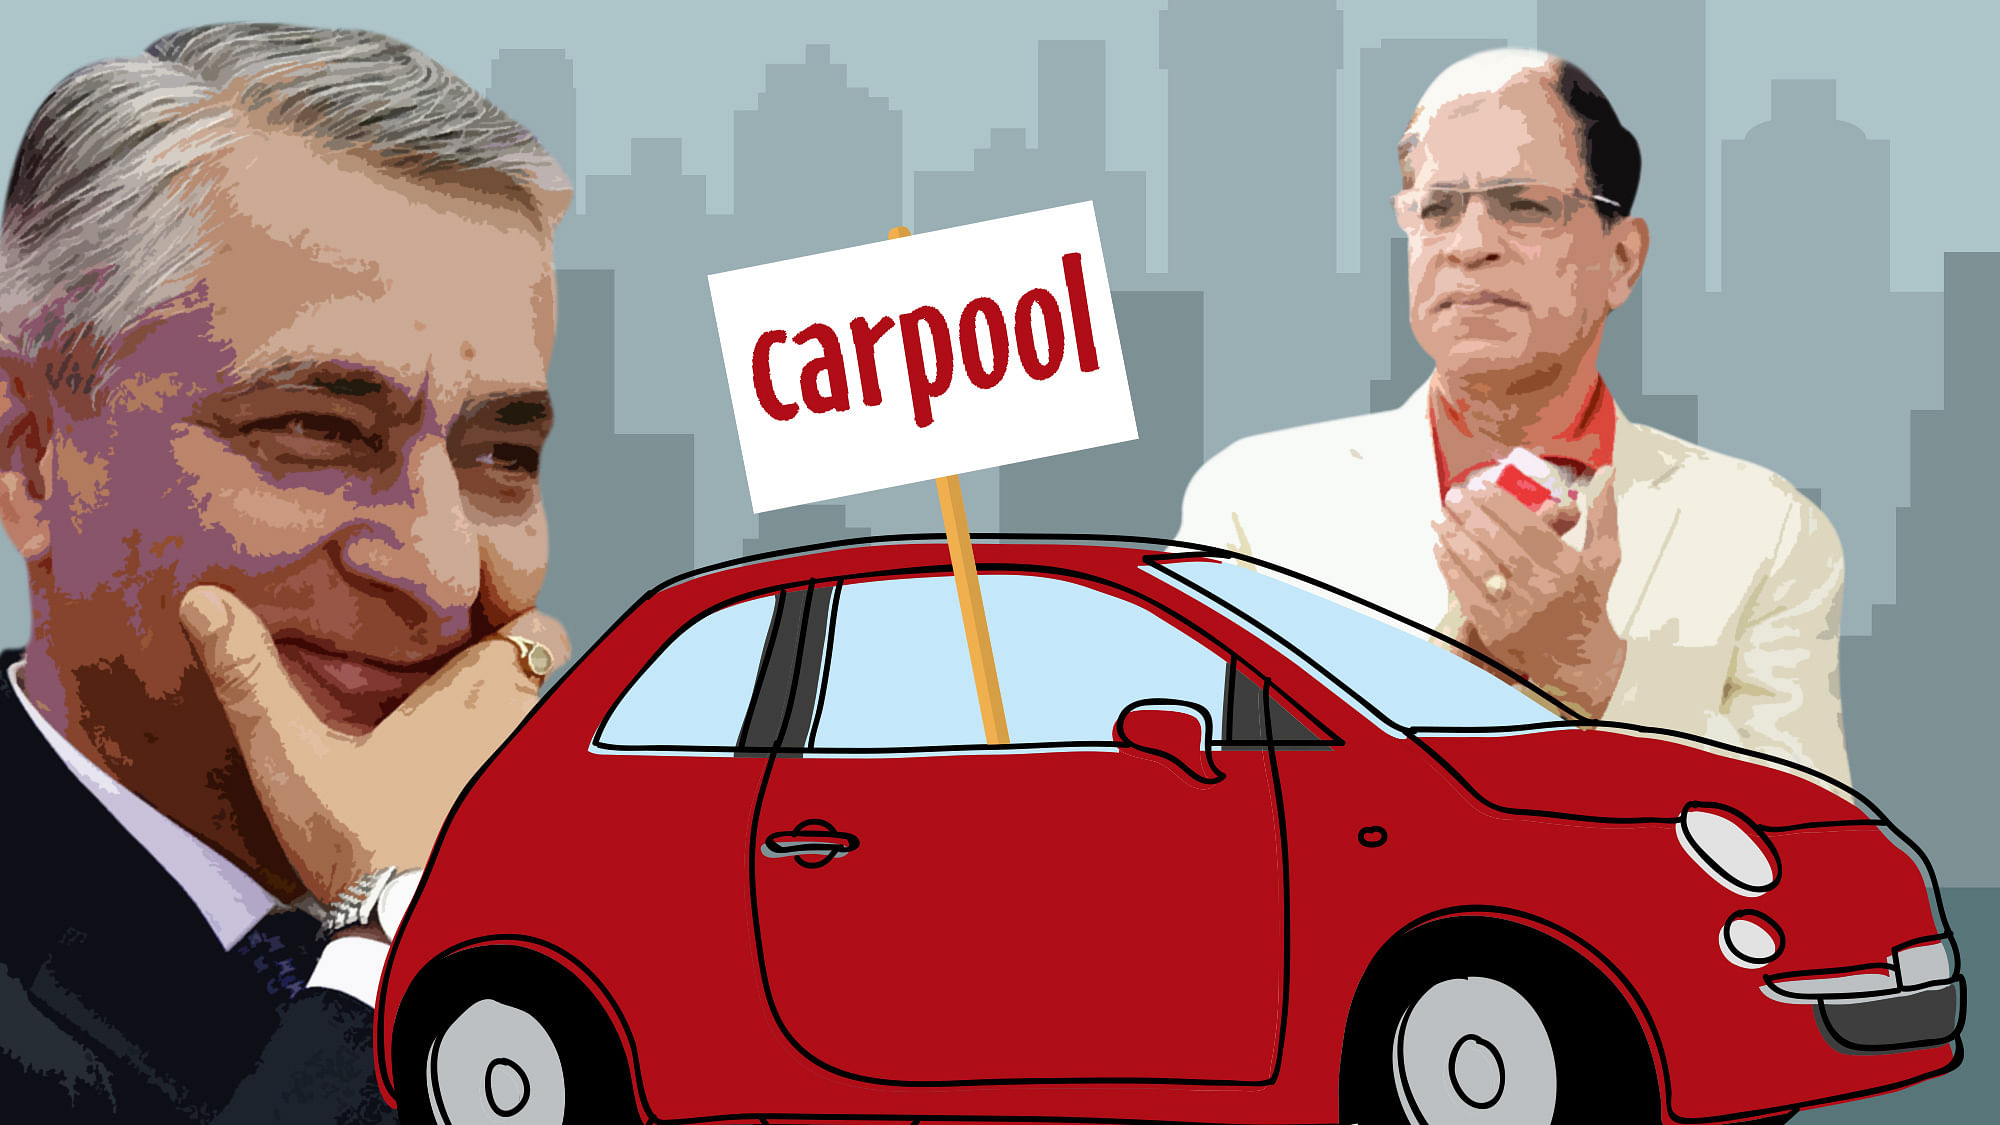 CJI TS Thakur and fellow judge AK Sikri have opted to carpool to court despite being exempt from the odd-even policy. (Photo: <b>The Quint</b>)